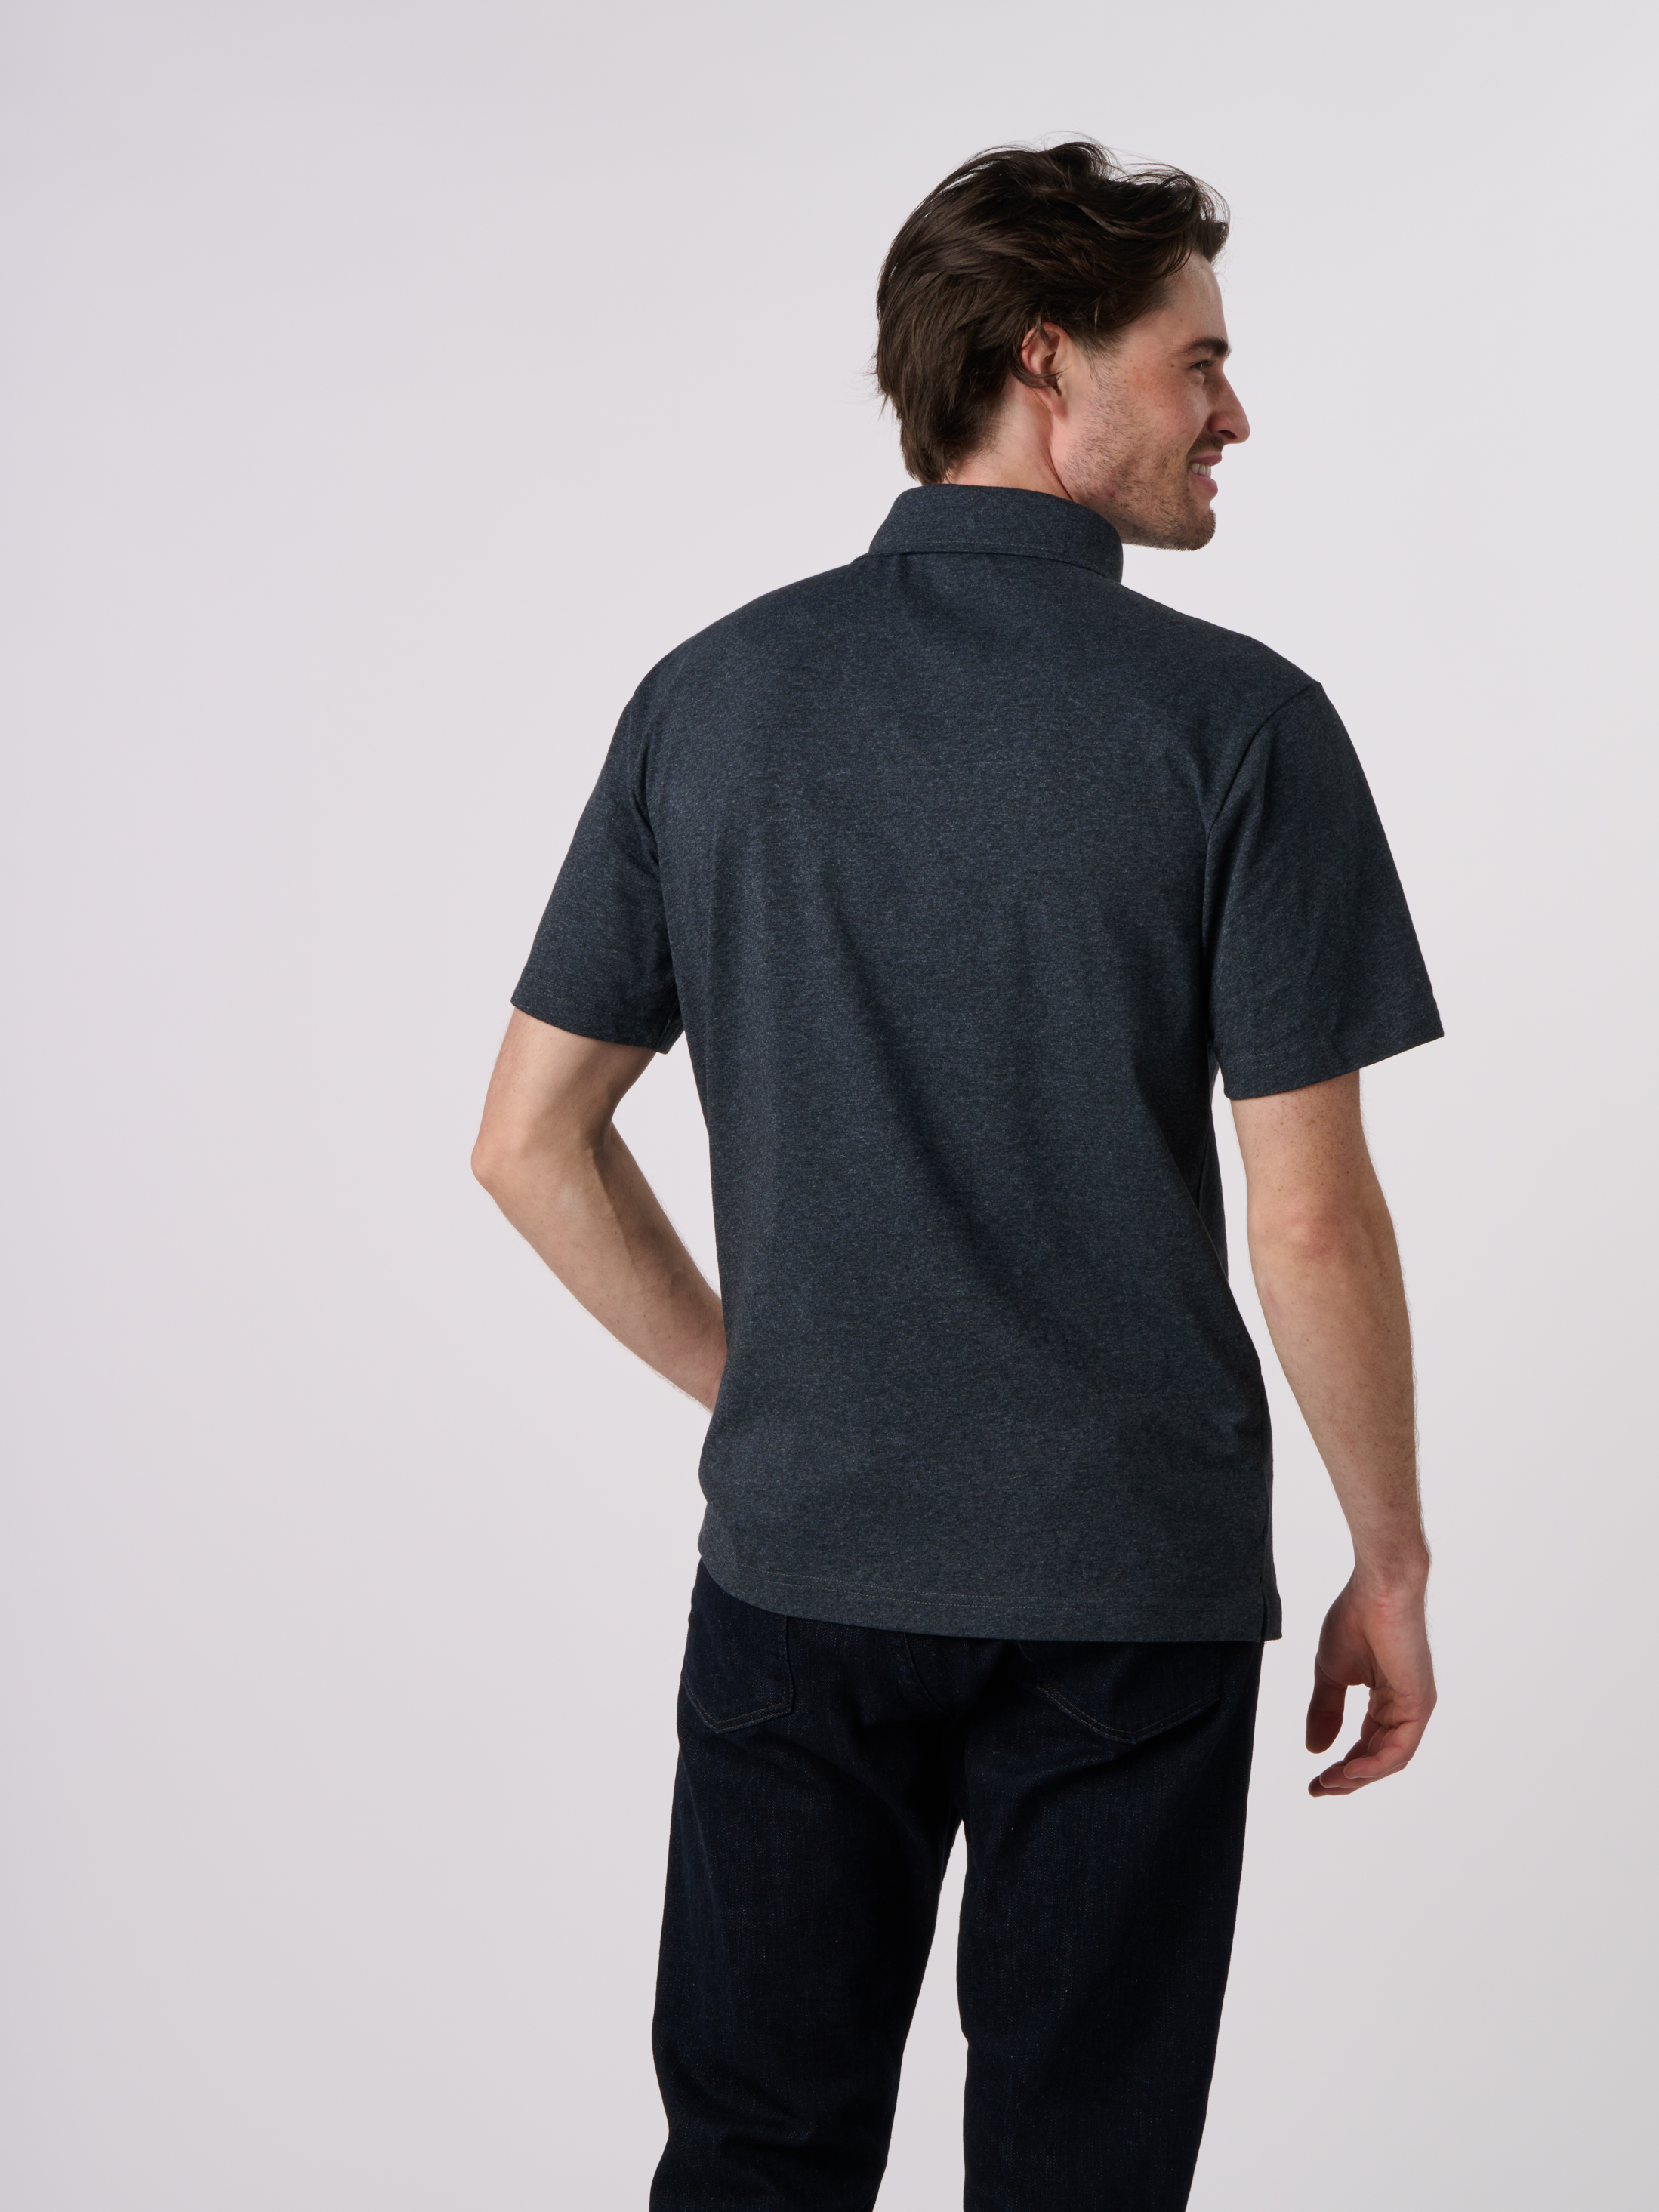 RECOVER_EC500_ECOPOLO_CHARCOAL_BACK.png